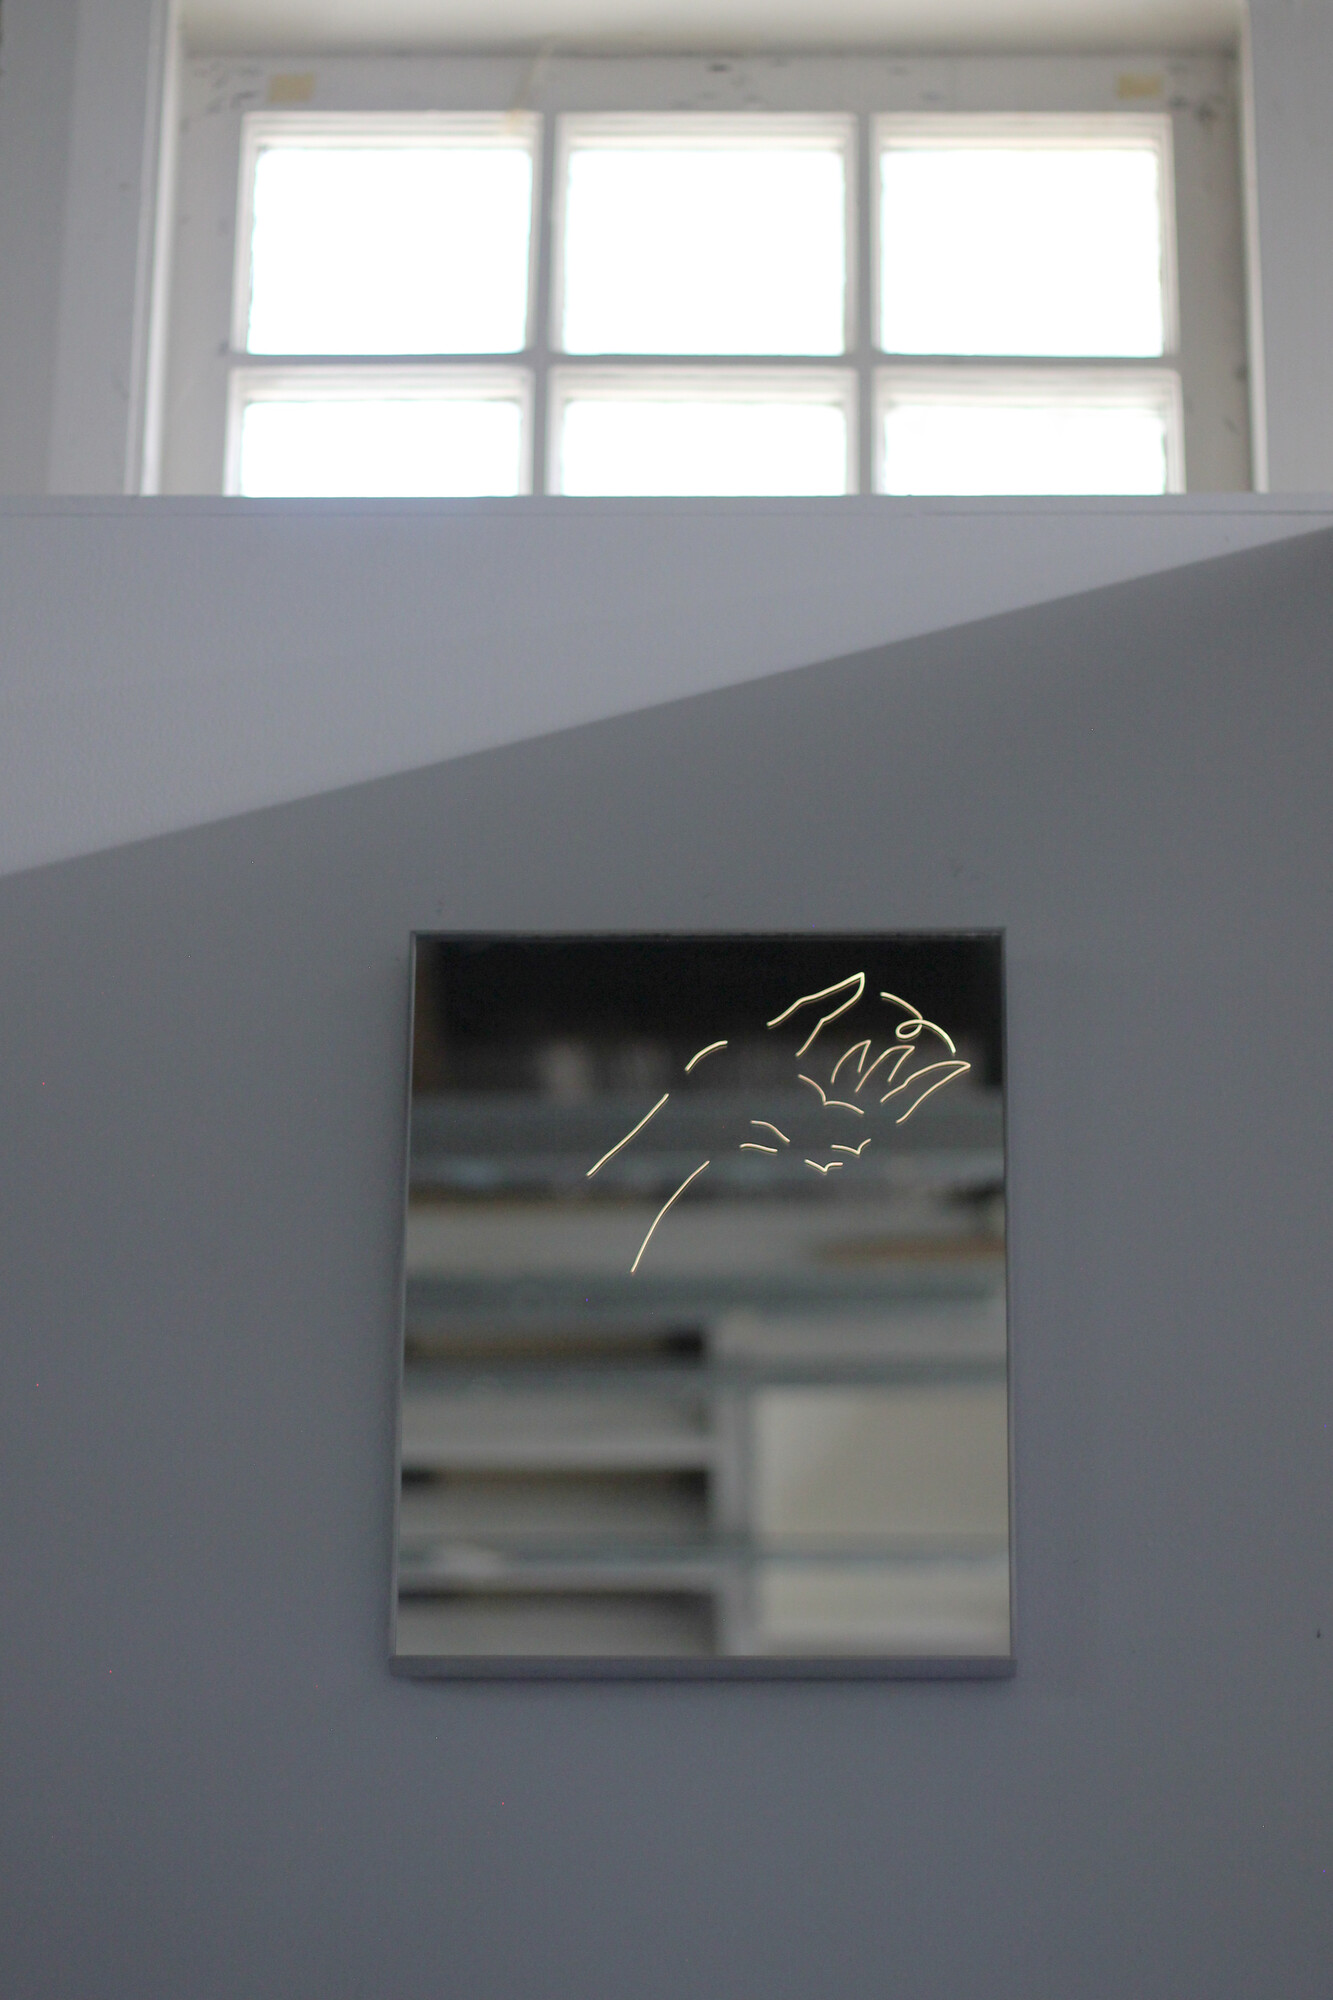 Tom Blake, <em>index, leaves</em>, 2022. Hand-etched de-silvered mirror, light box, artist-made aluminium frame, 40 x 30 cm. Image courtesy the artist and N.Smith Gallery.